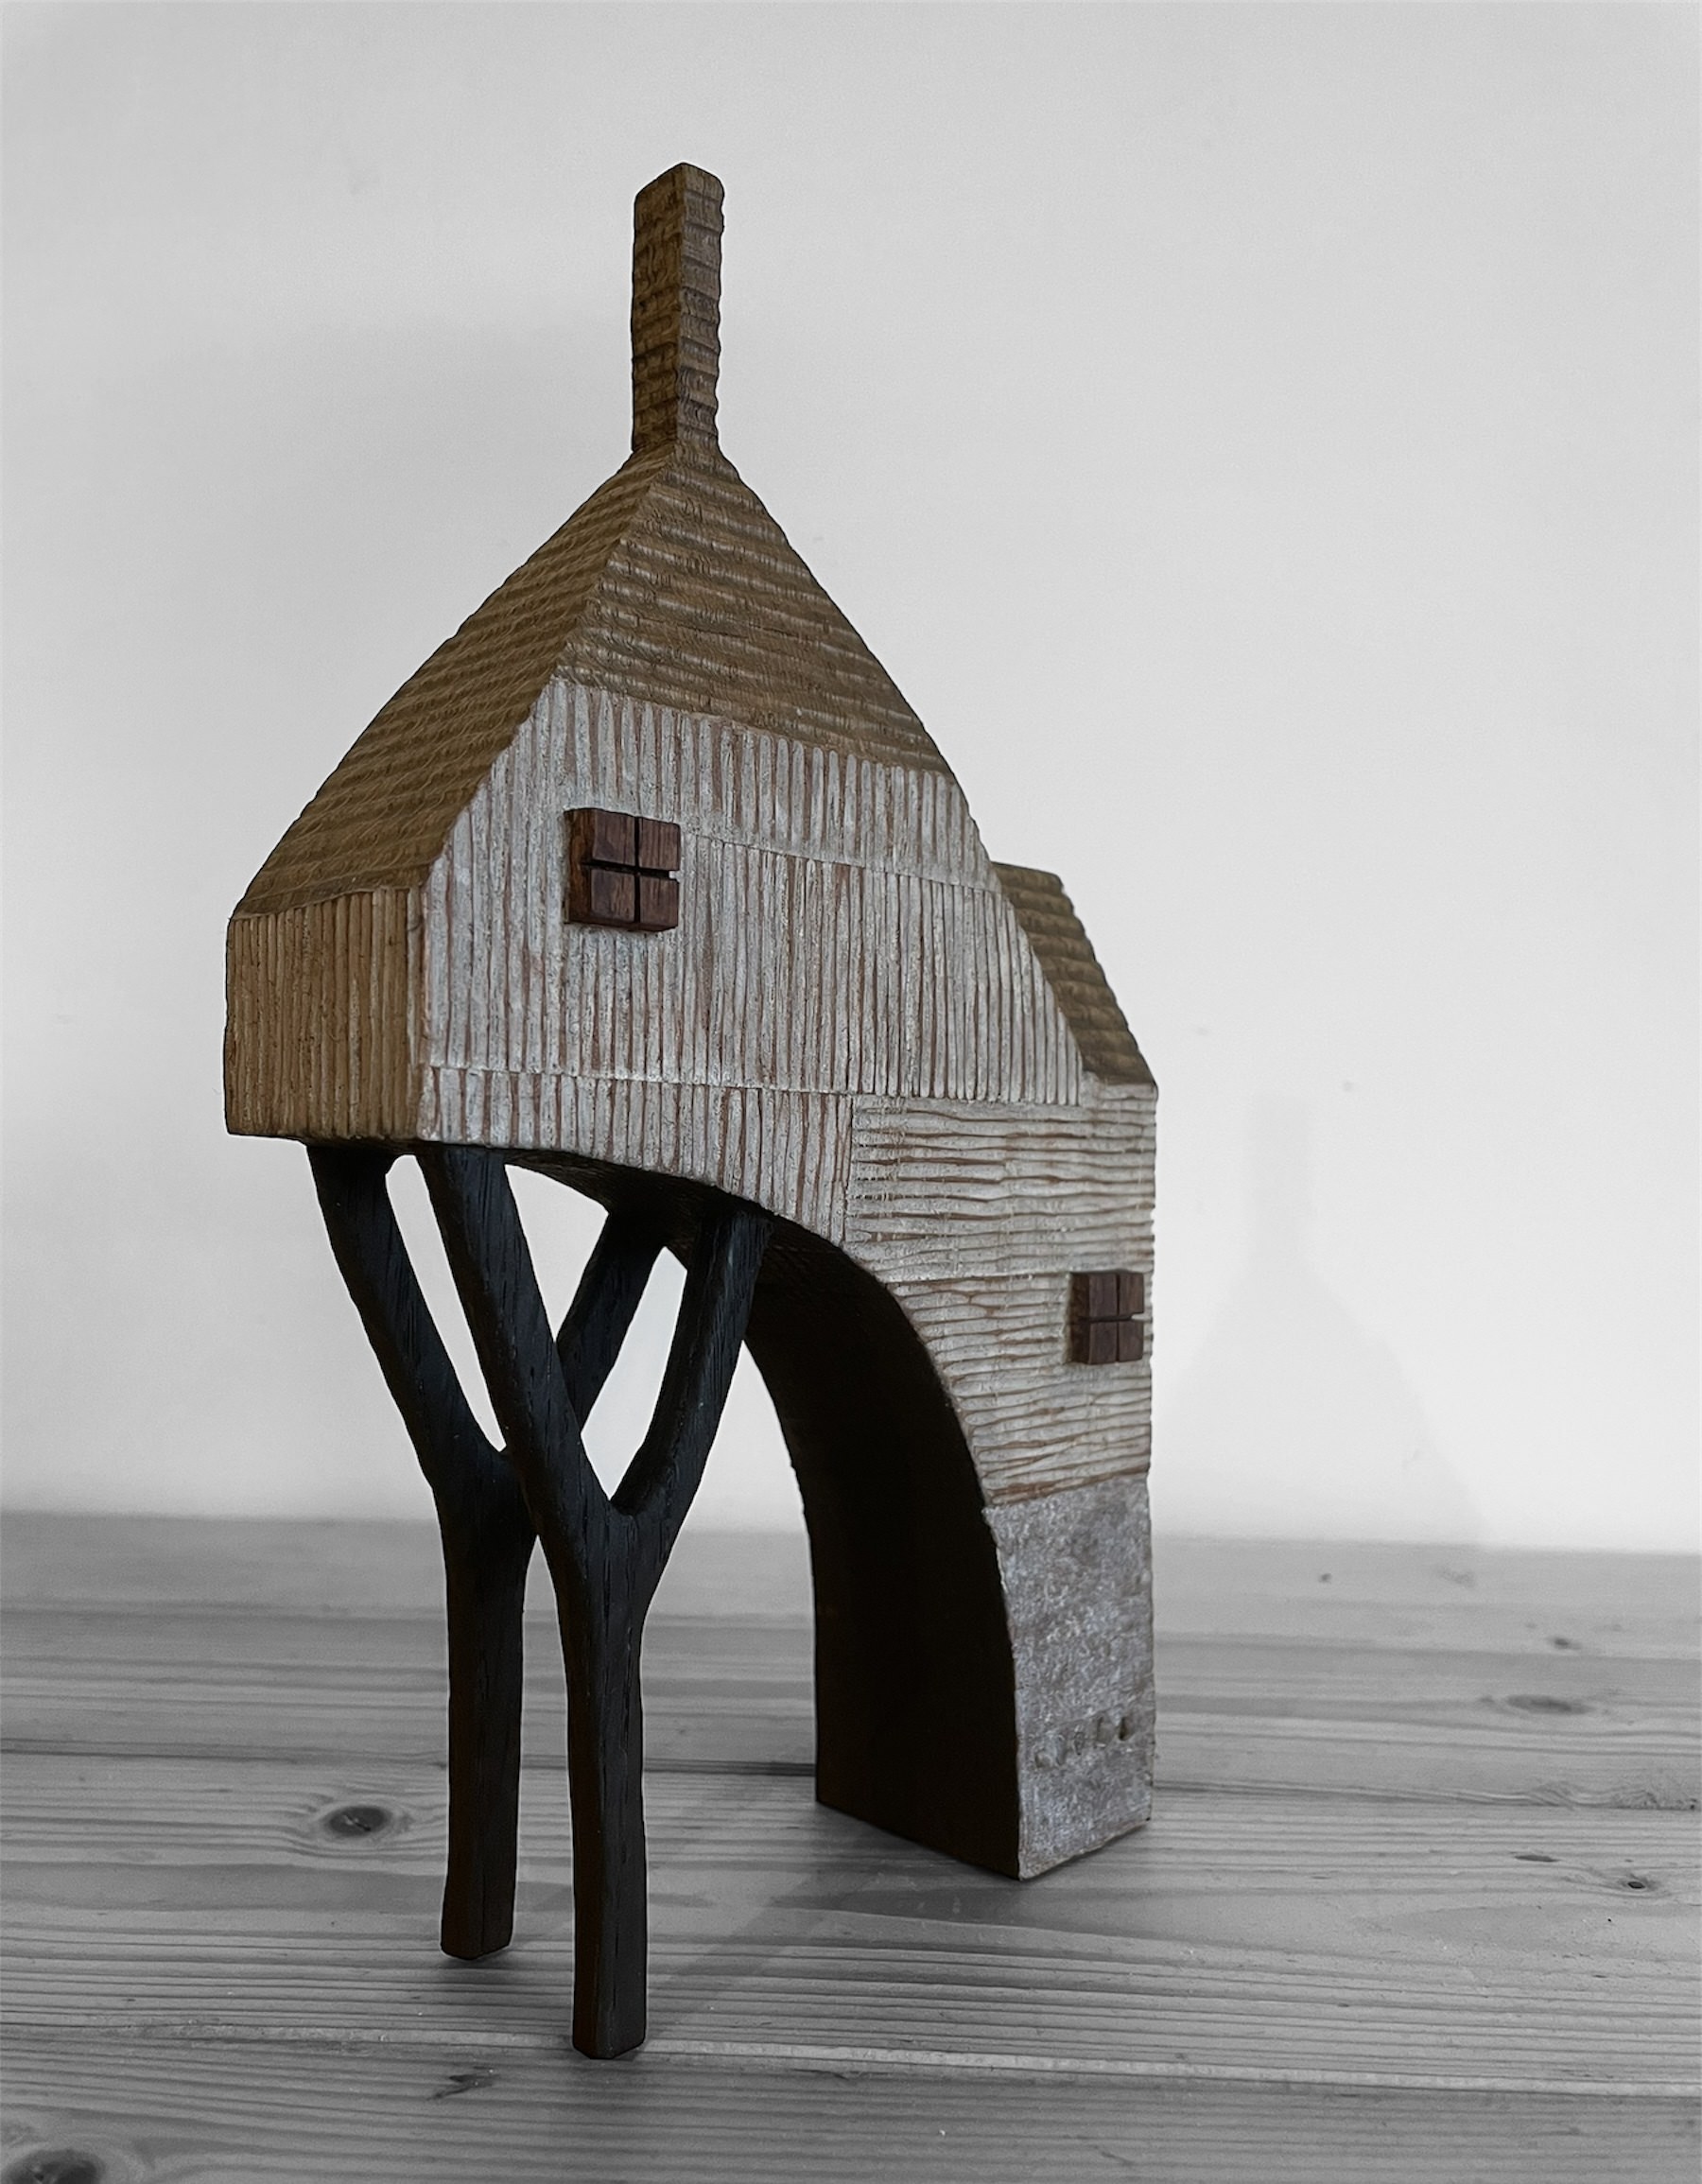 Miniature wooden house with chimney and stilts.